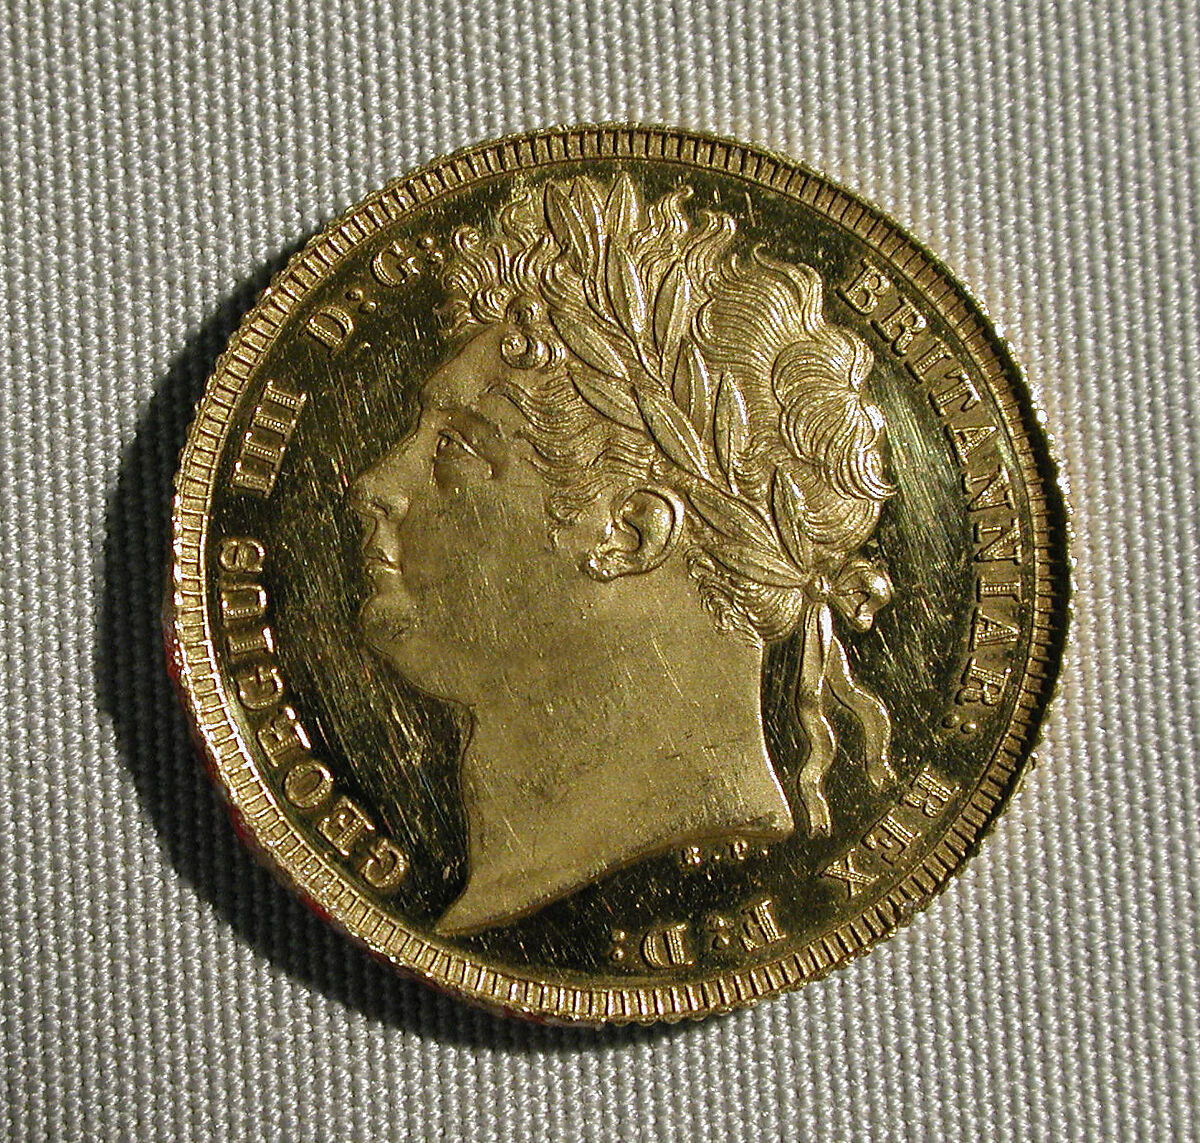 Proof sovereign of George IV (coronation year), Medalist: Benedetto Pistrucci (Italian, 1783–1855, active England), Gold, British 